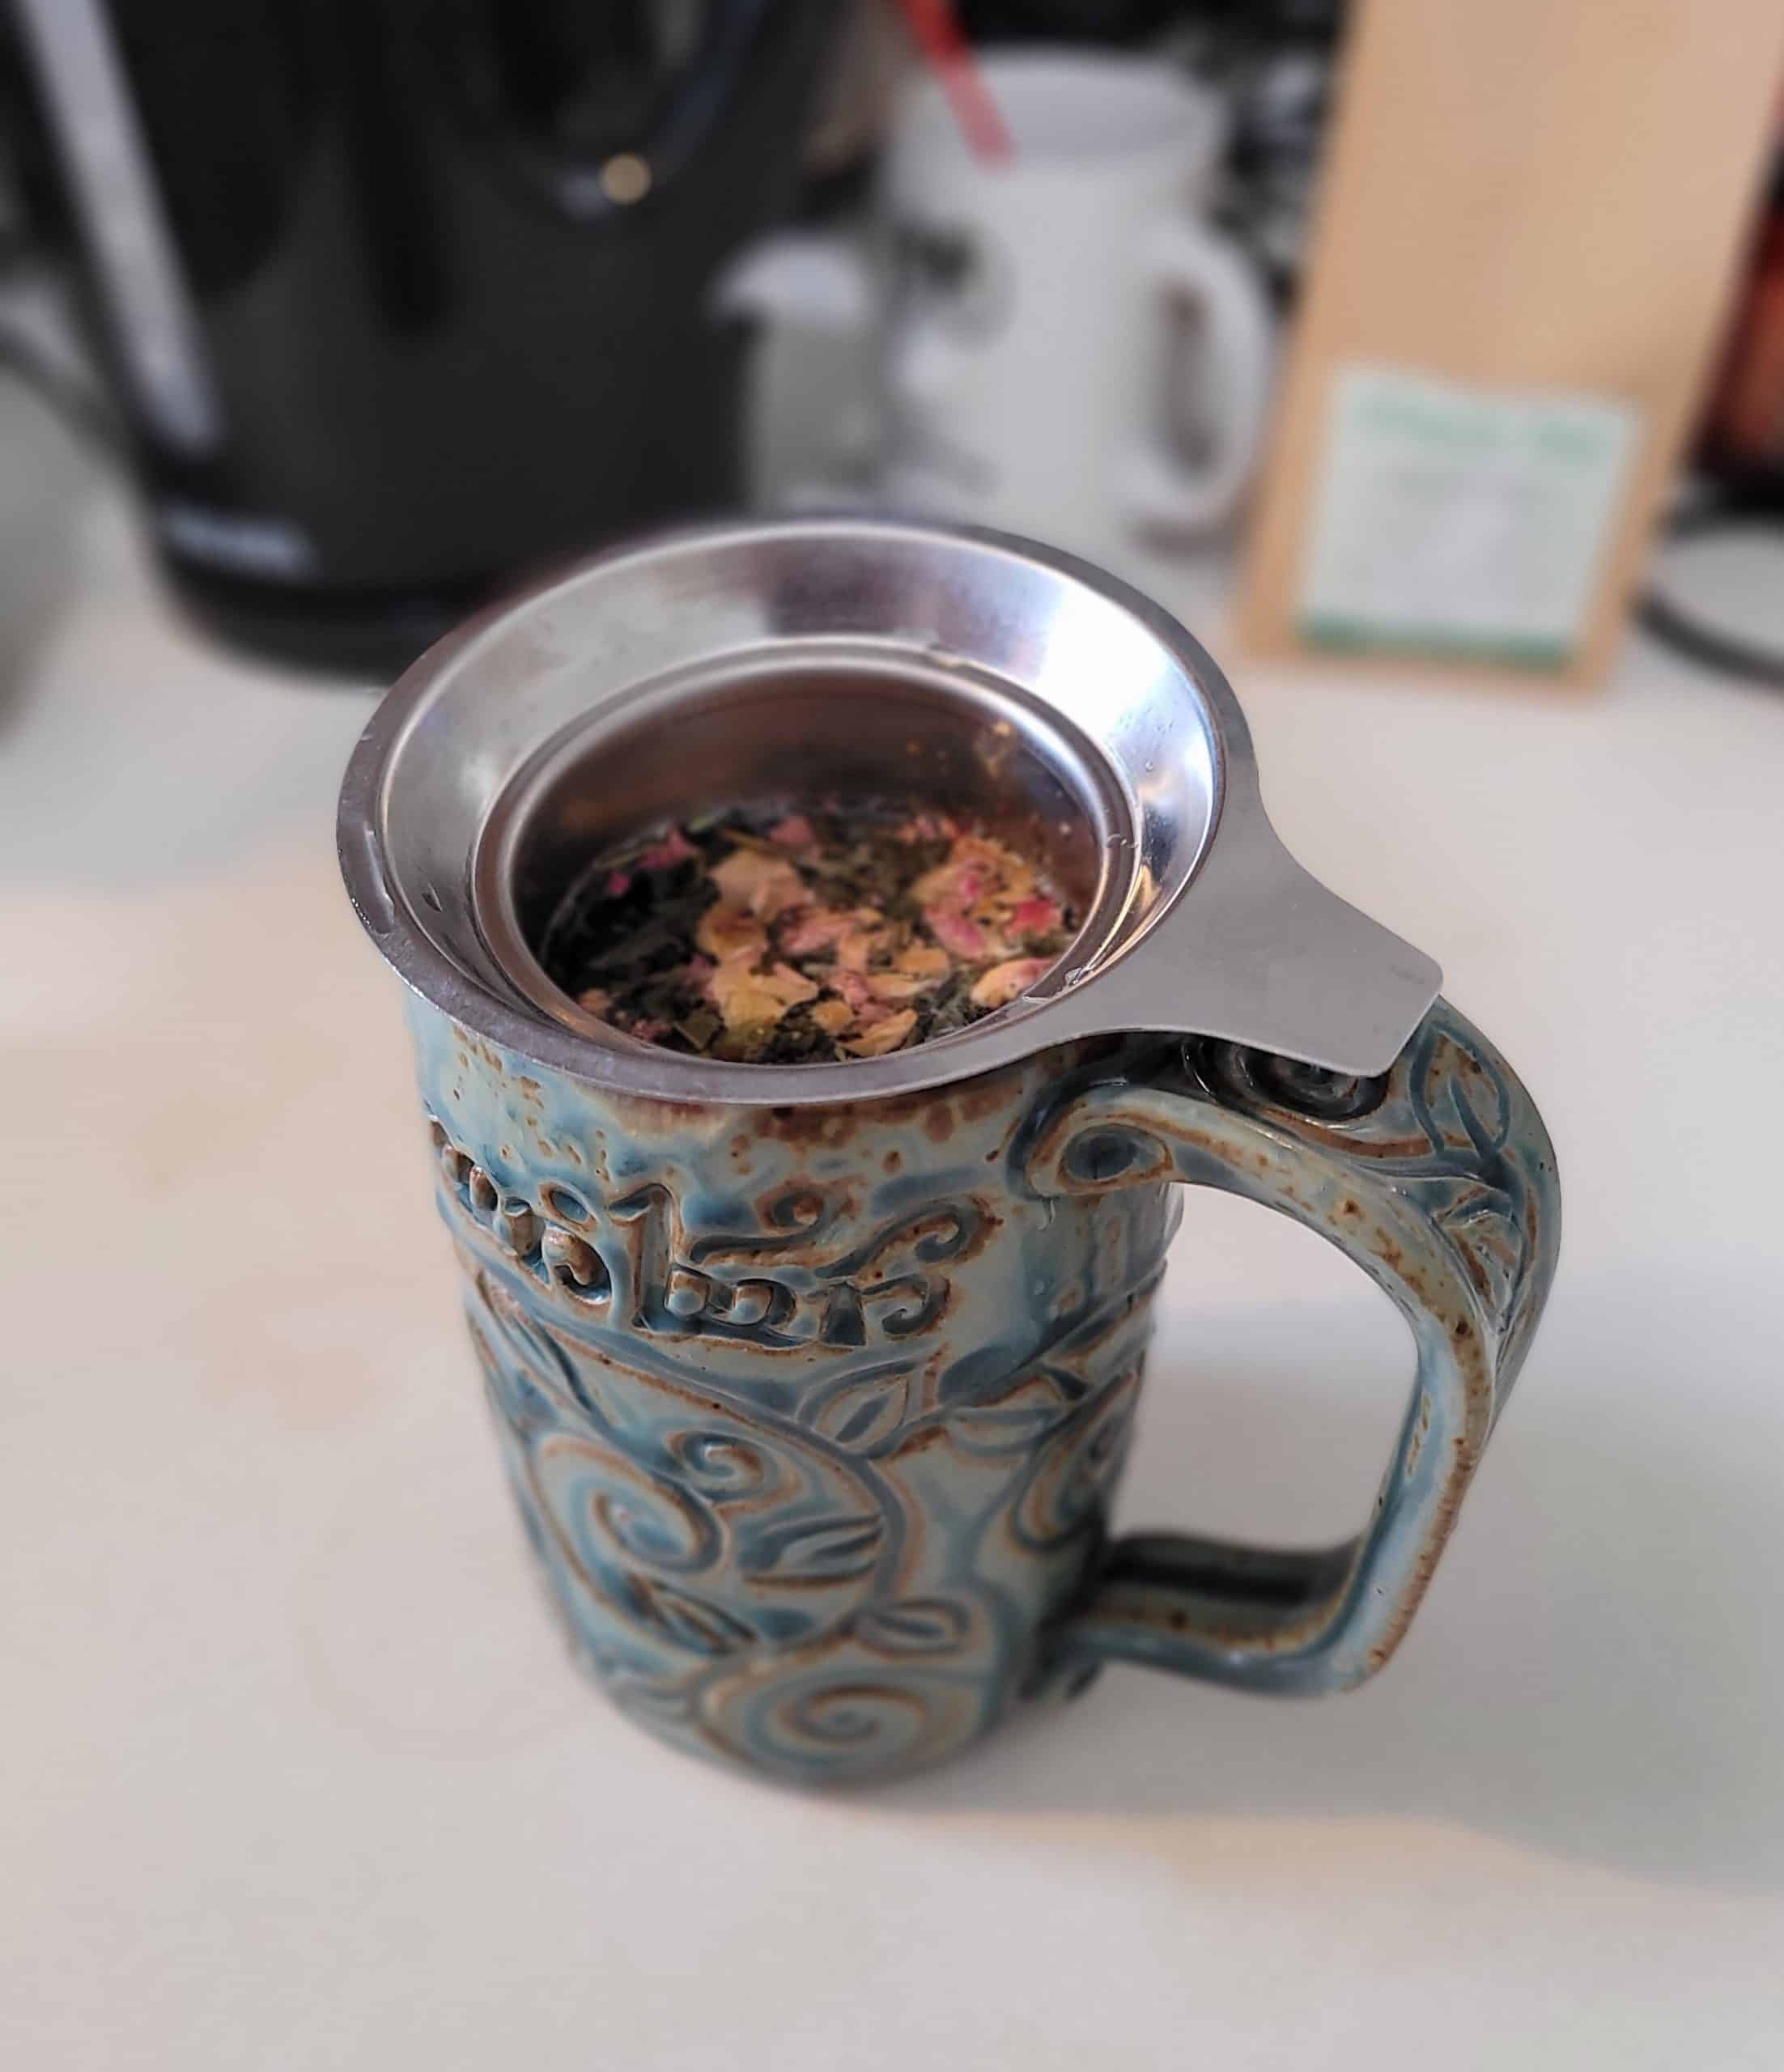 Steeping a tasty cup of green tea with rose petals.